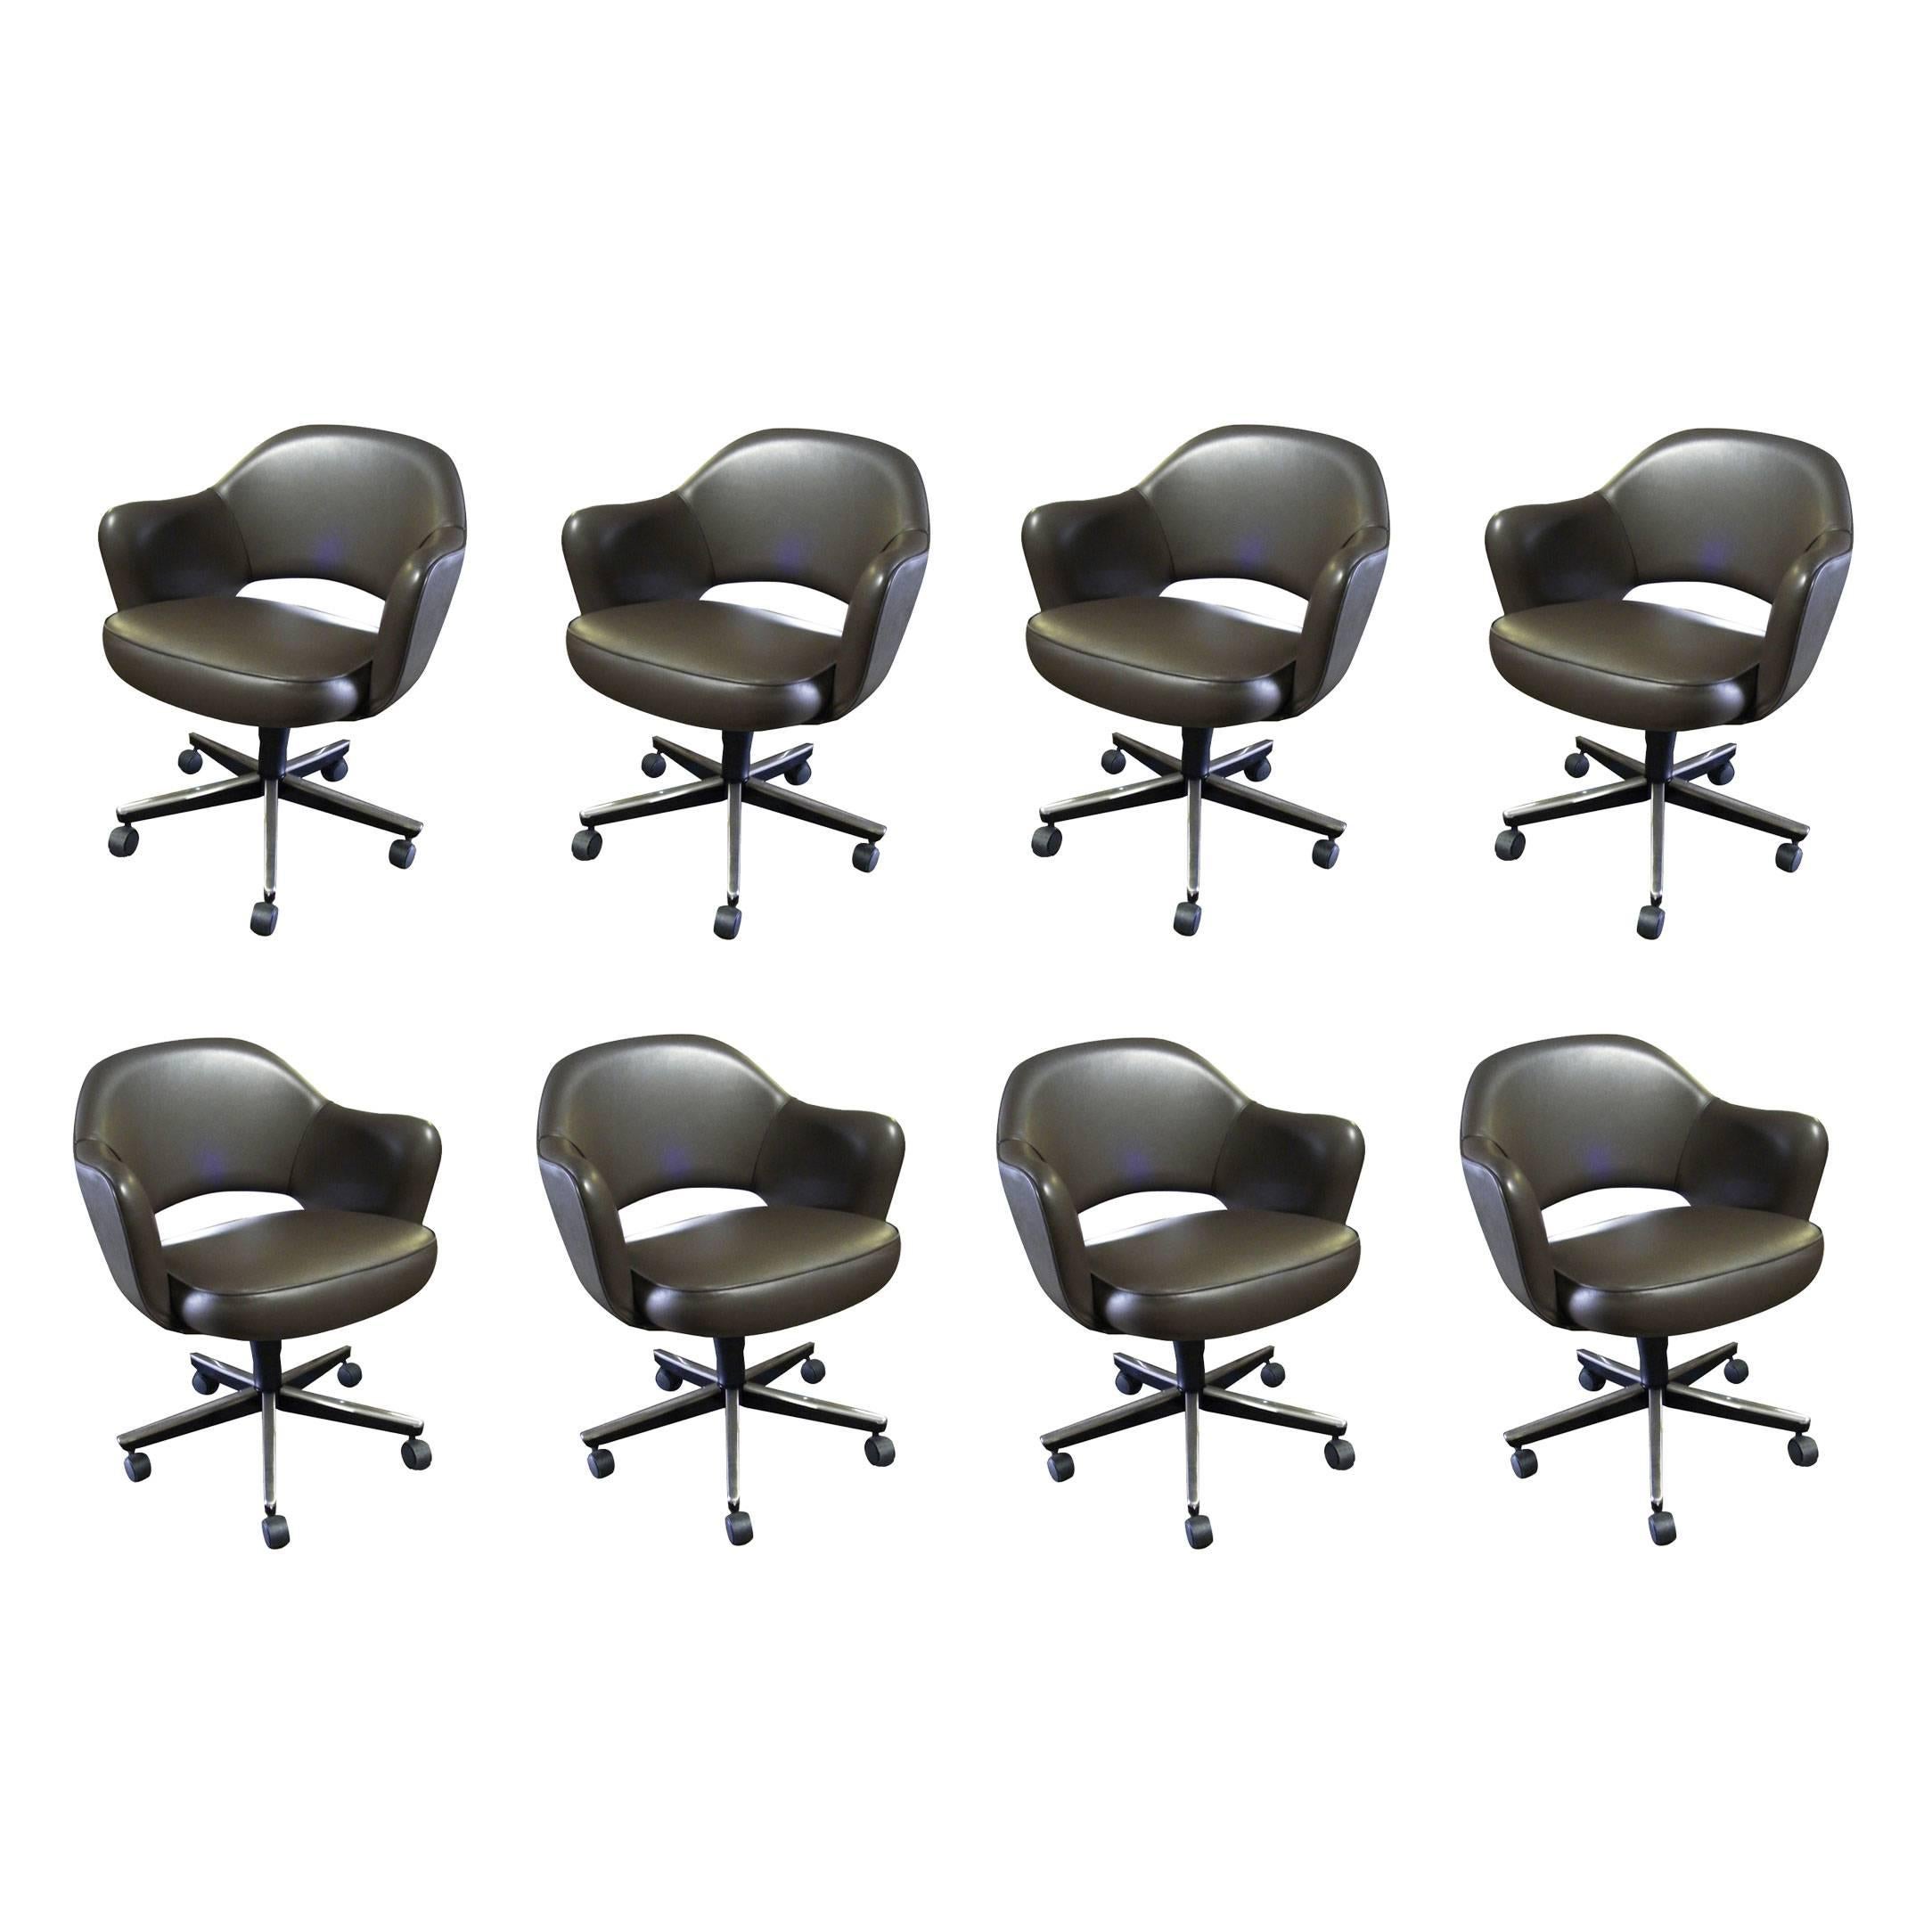 Set of 8 Saarinen Executive Taupe Leather Armchairs 5 Star Base